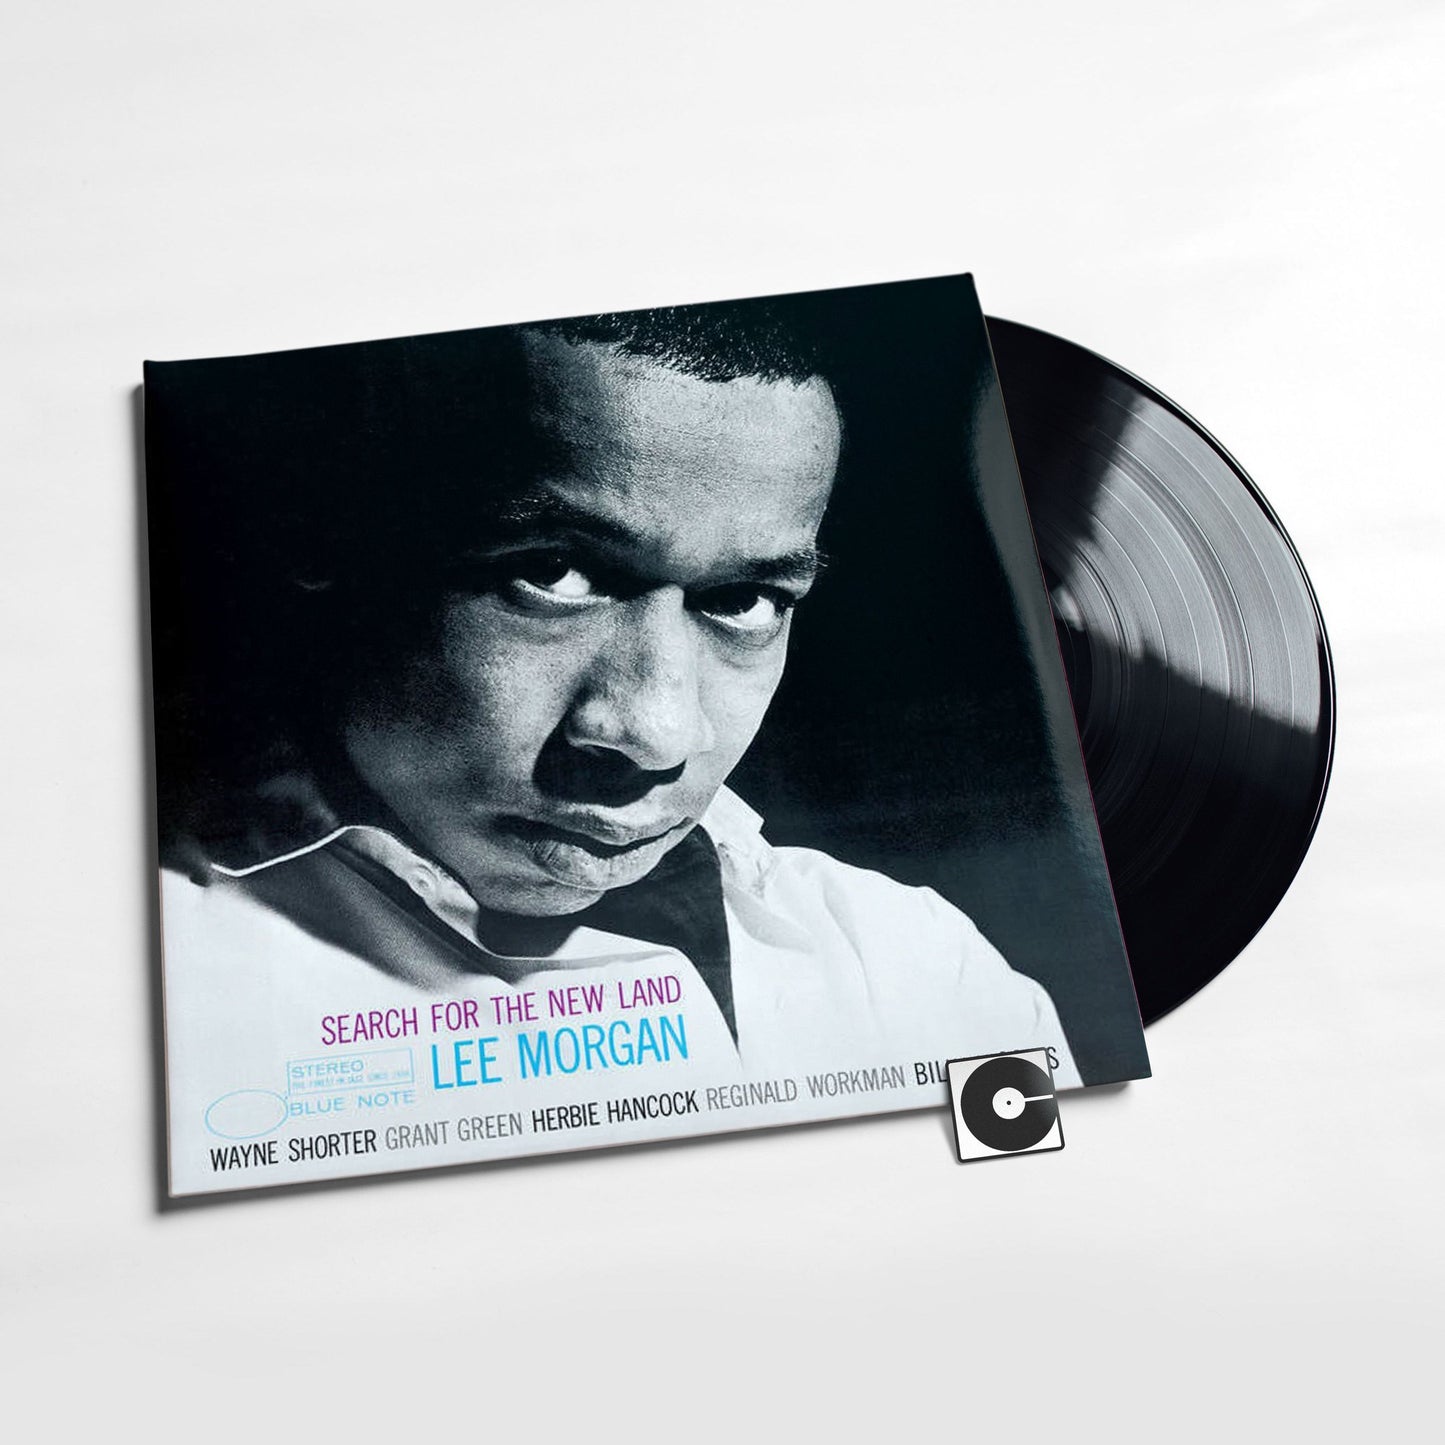 Lee Morgan - "Search For The New Land"